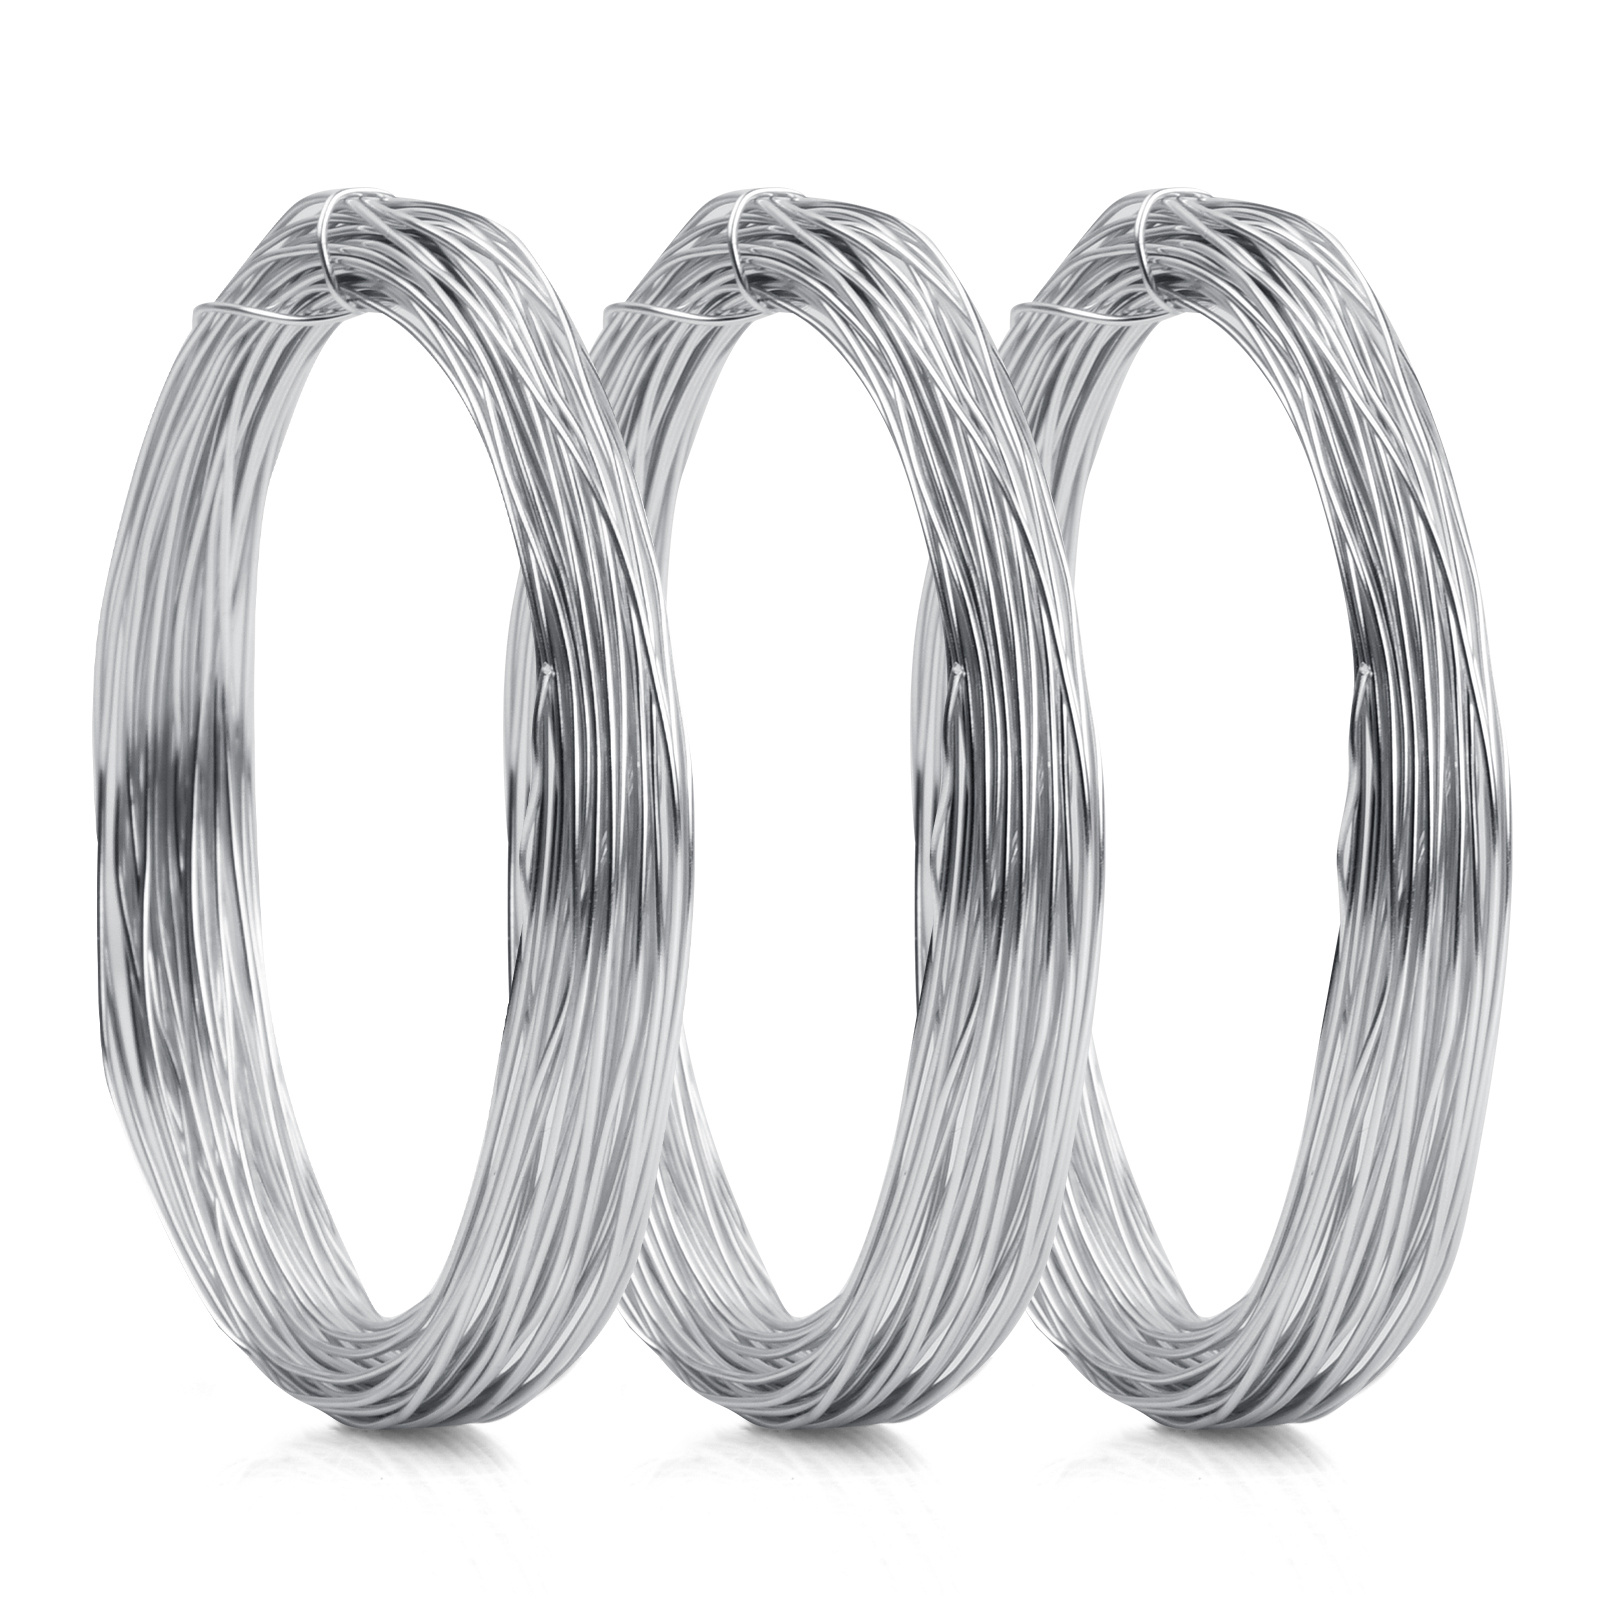 Silver wire for jewelry making